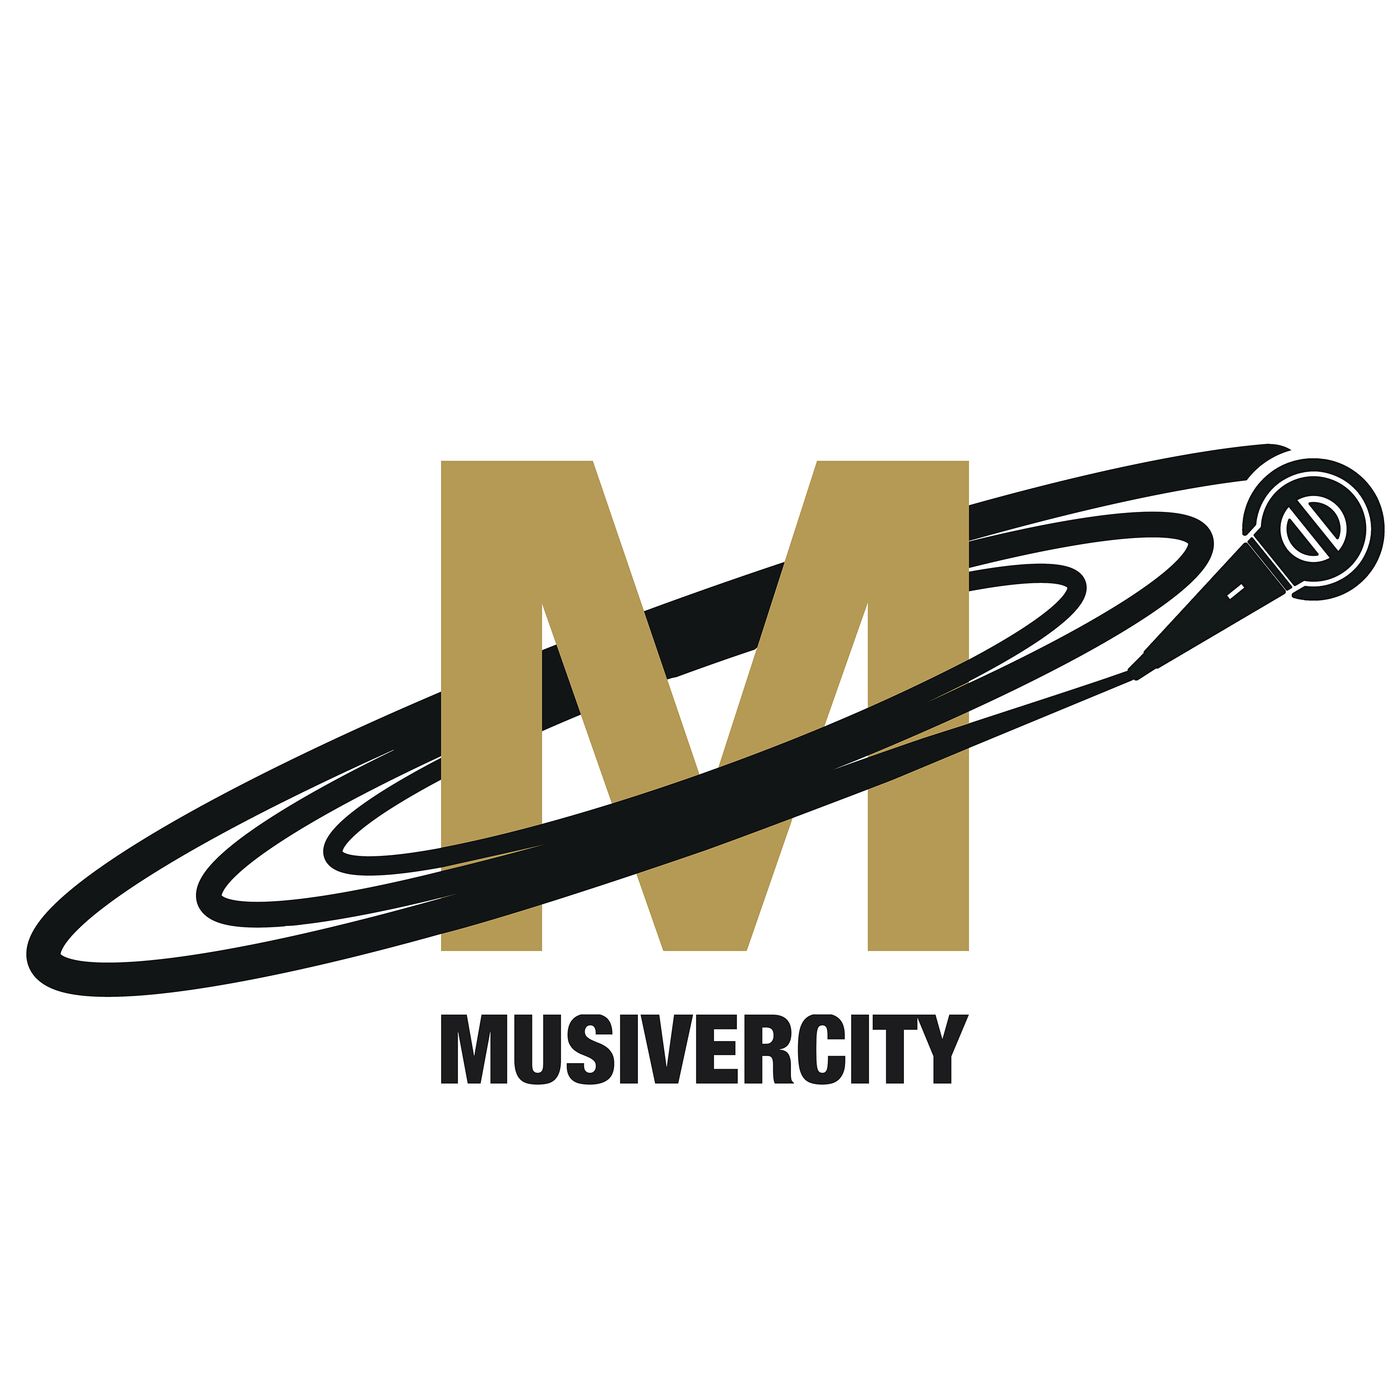 So You Made A Song...Now What - Musivercity Podcast